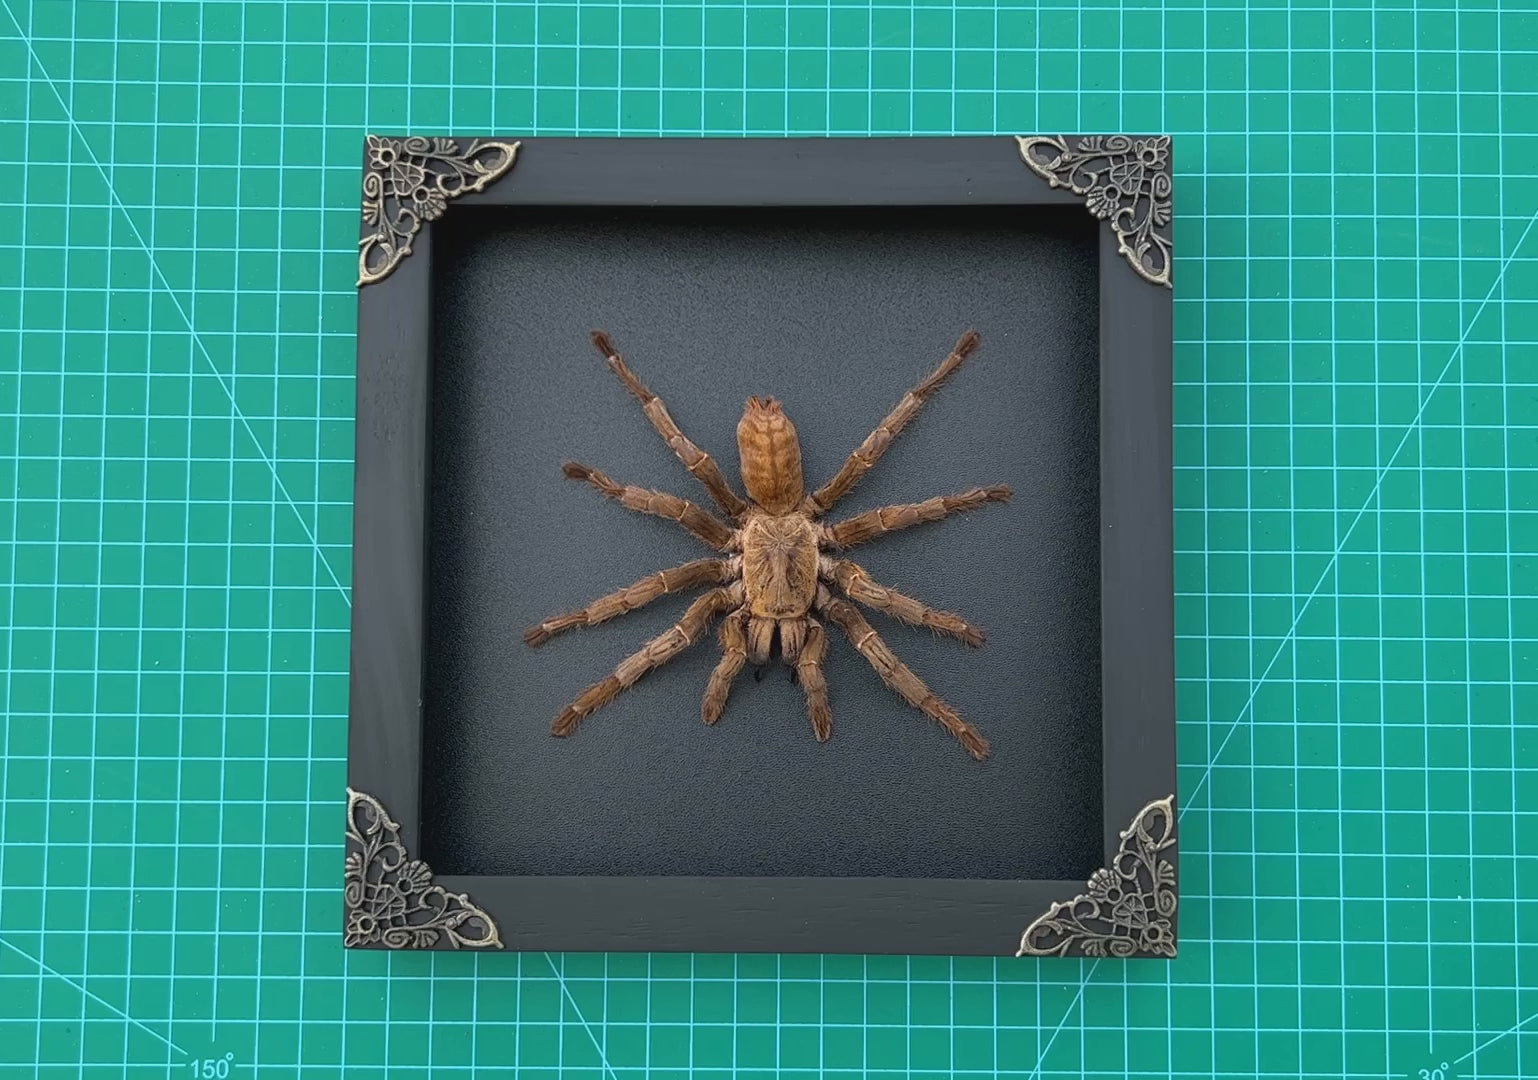 Real Framed Spider Shadow Box Bug Insect Unique Entomology Specimen Oddity Taxidermy Collection Tabletop Wall Art Home Decor Living Gallery K16-56-DE